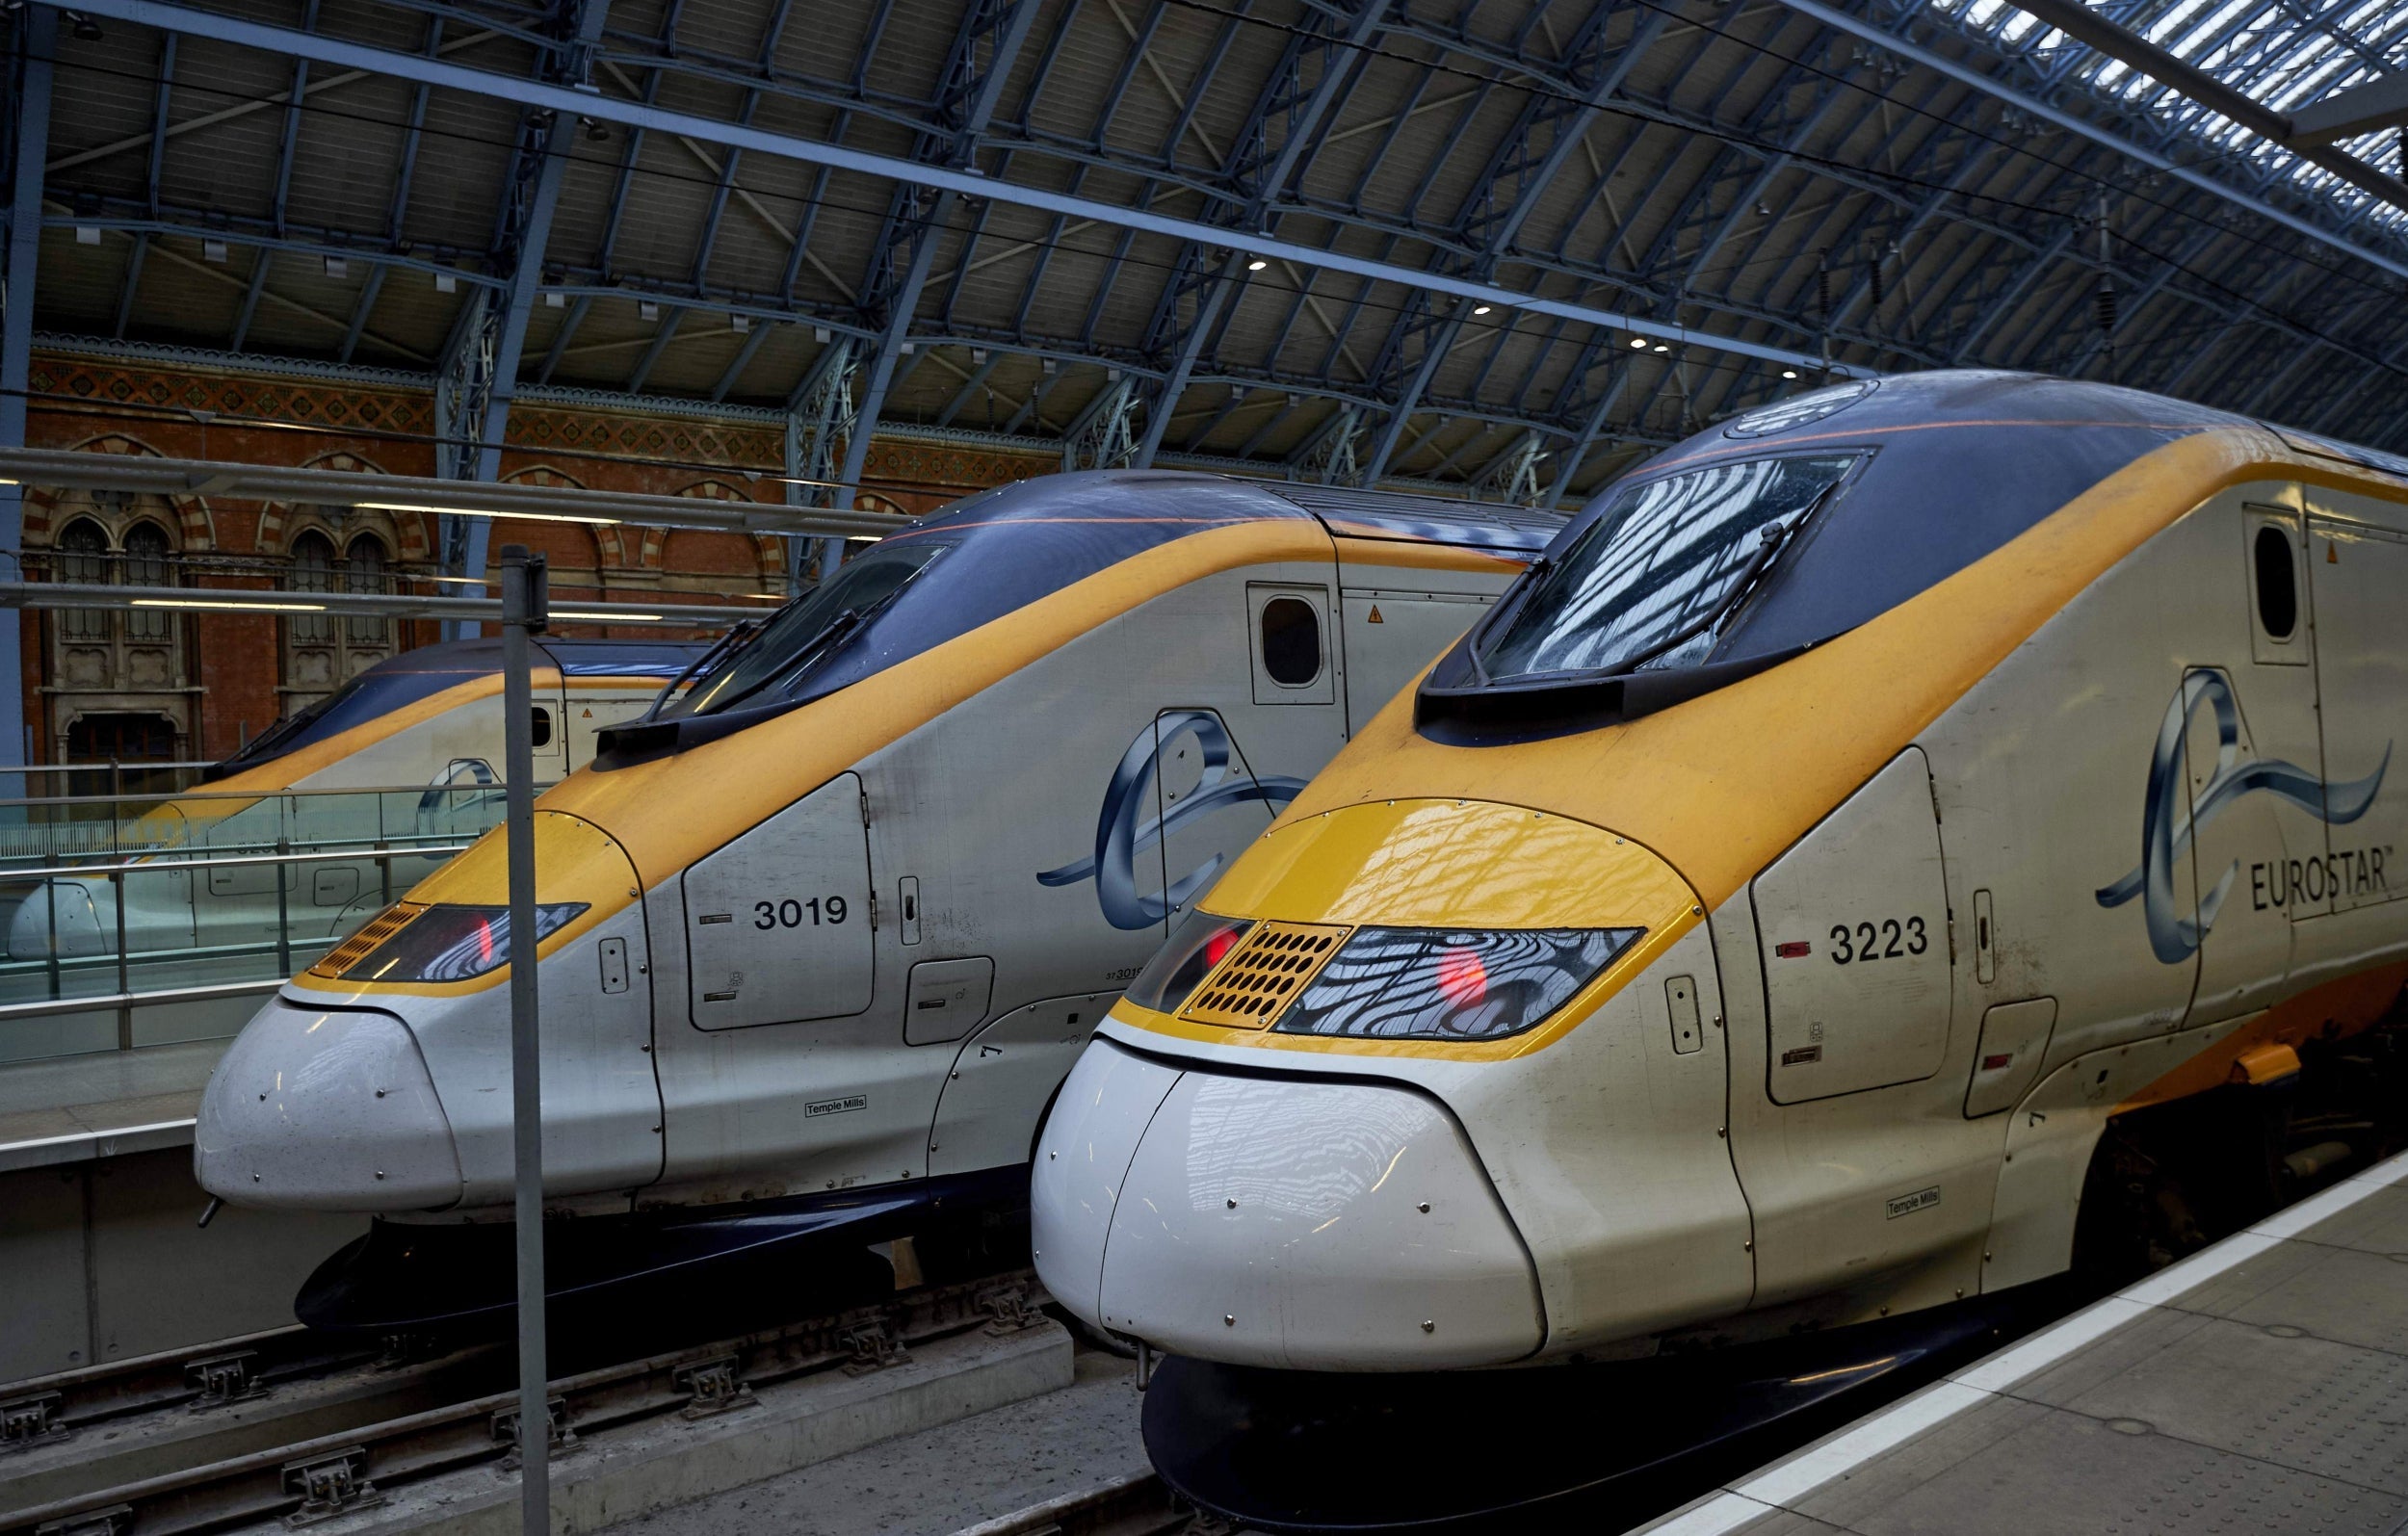 Eurostar now connects London to three European nations